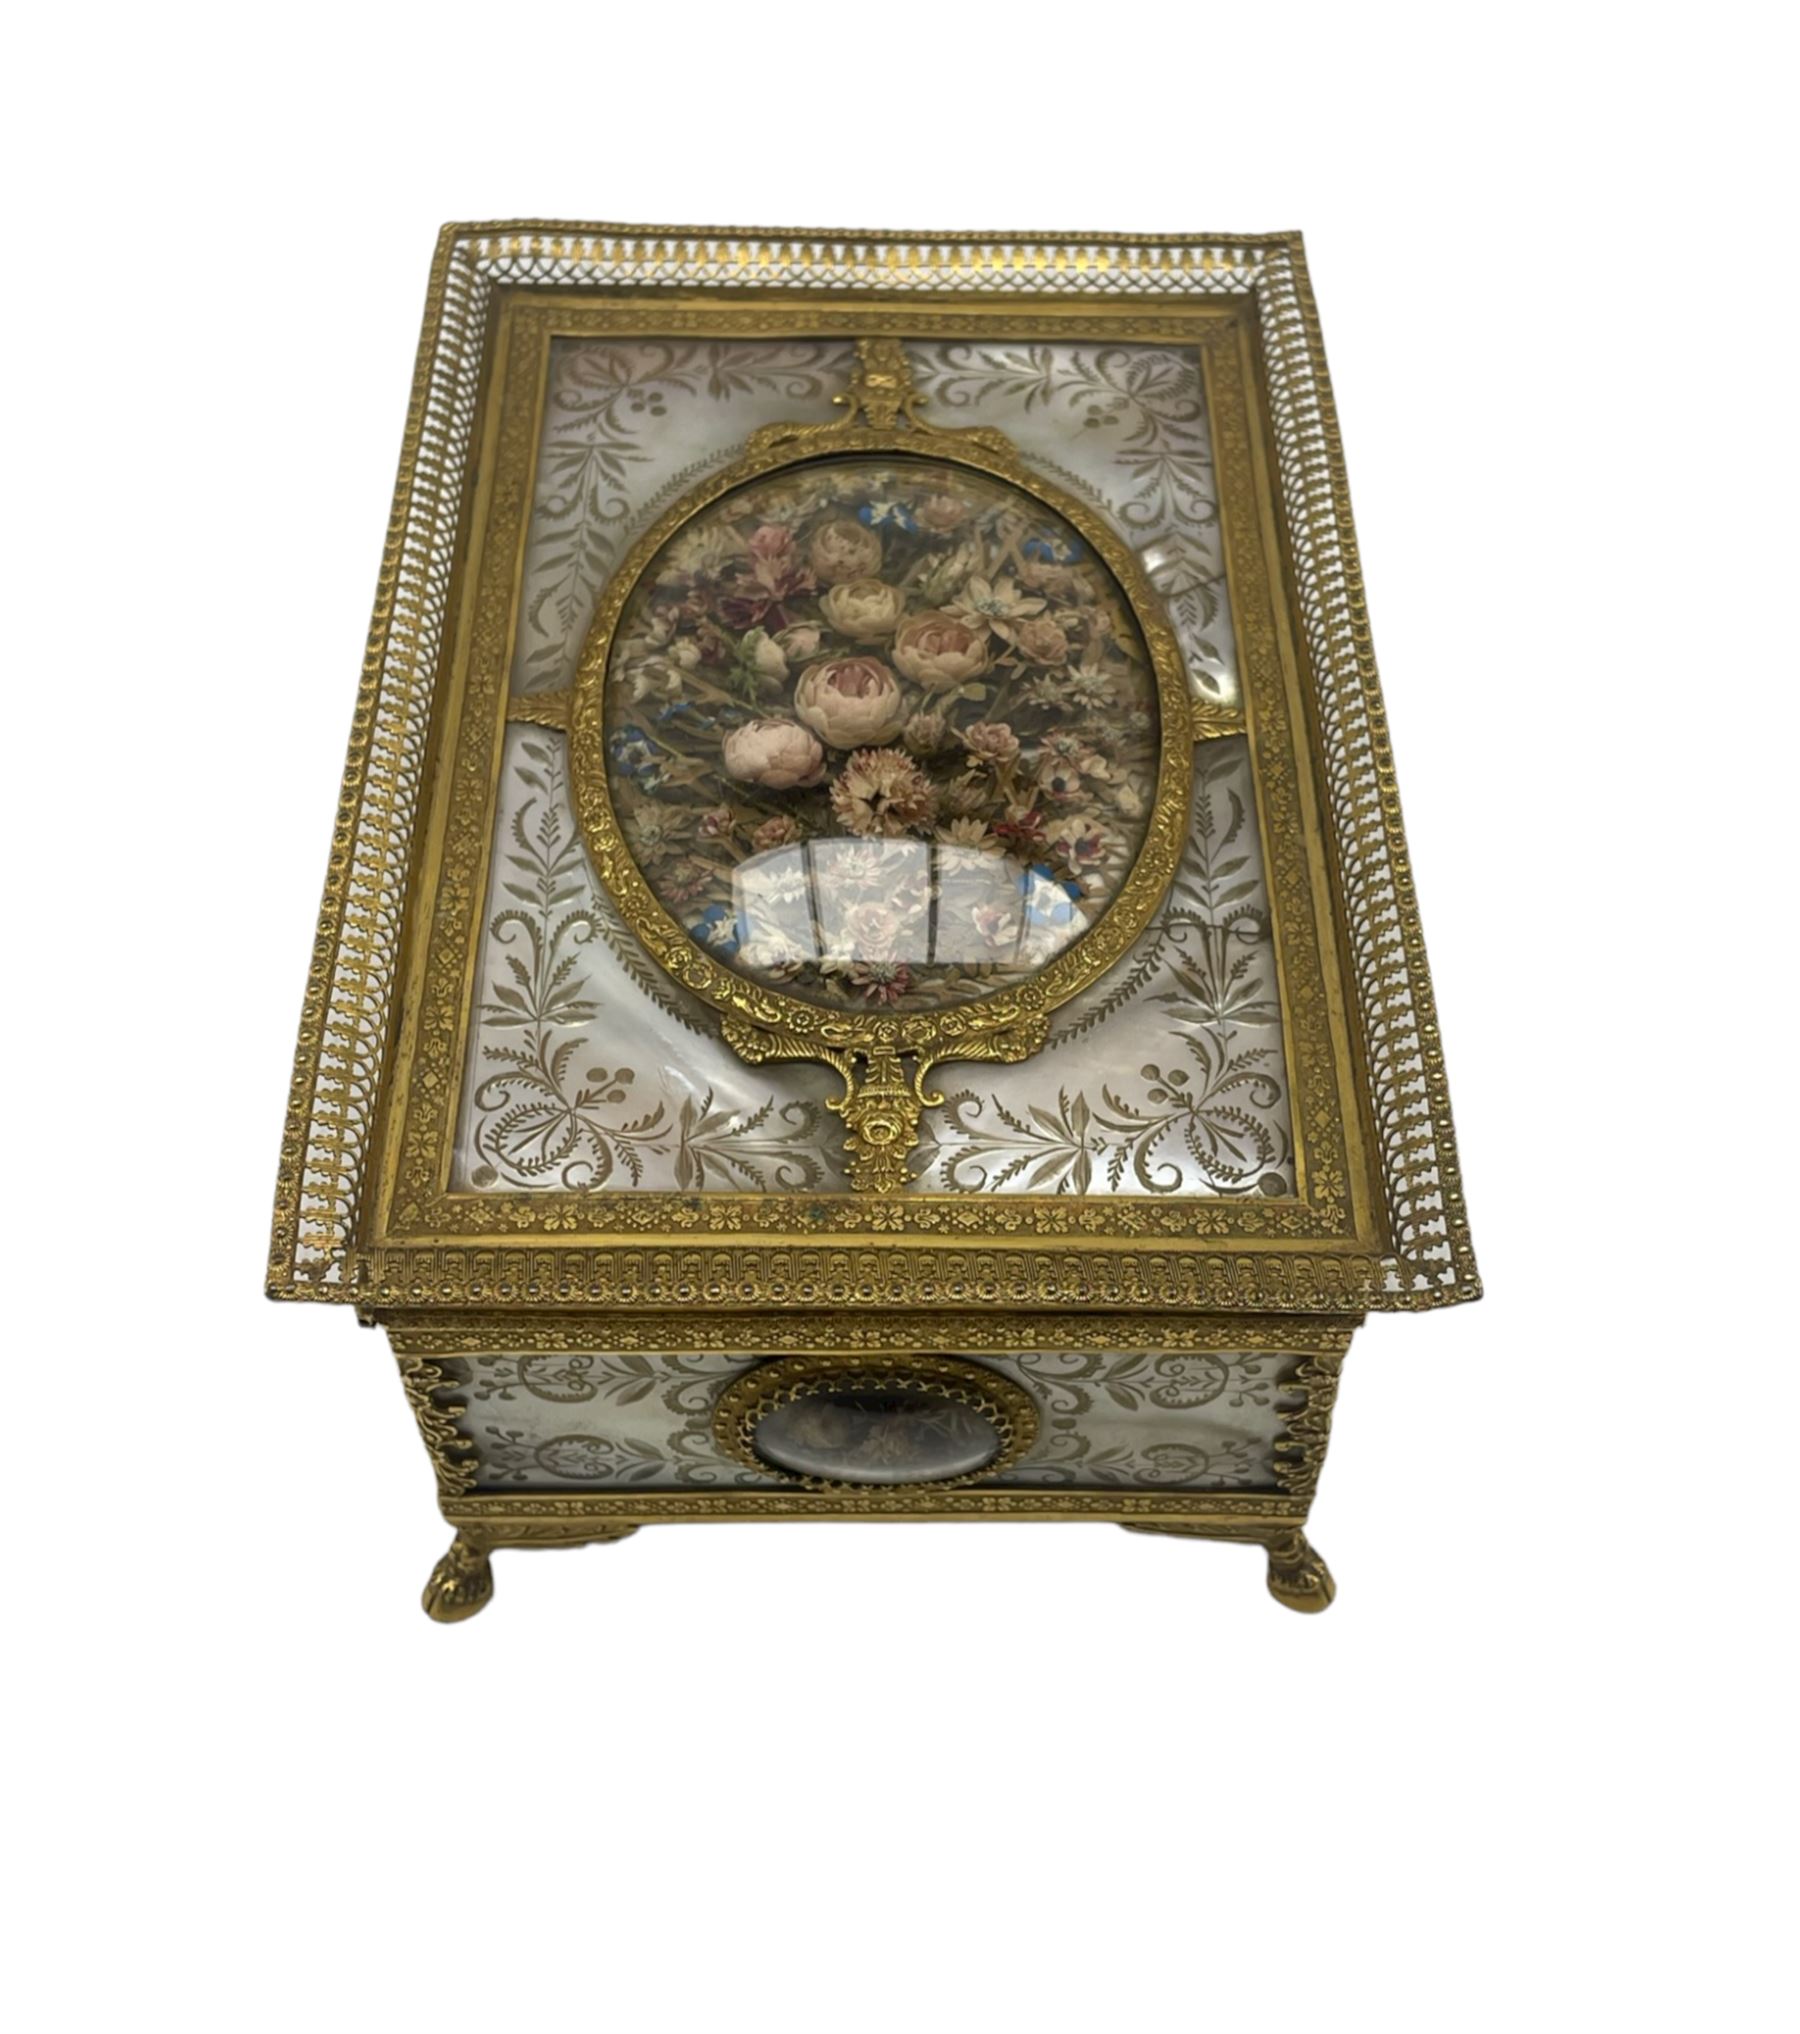 Early 19th century French Palais Royal type ormolu and mother-of-pearl musical sewing etui - Image 19 of 19